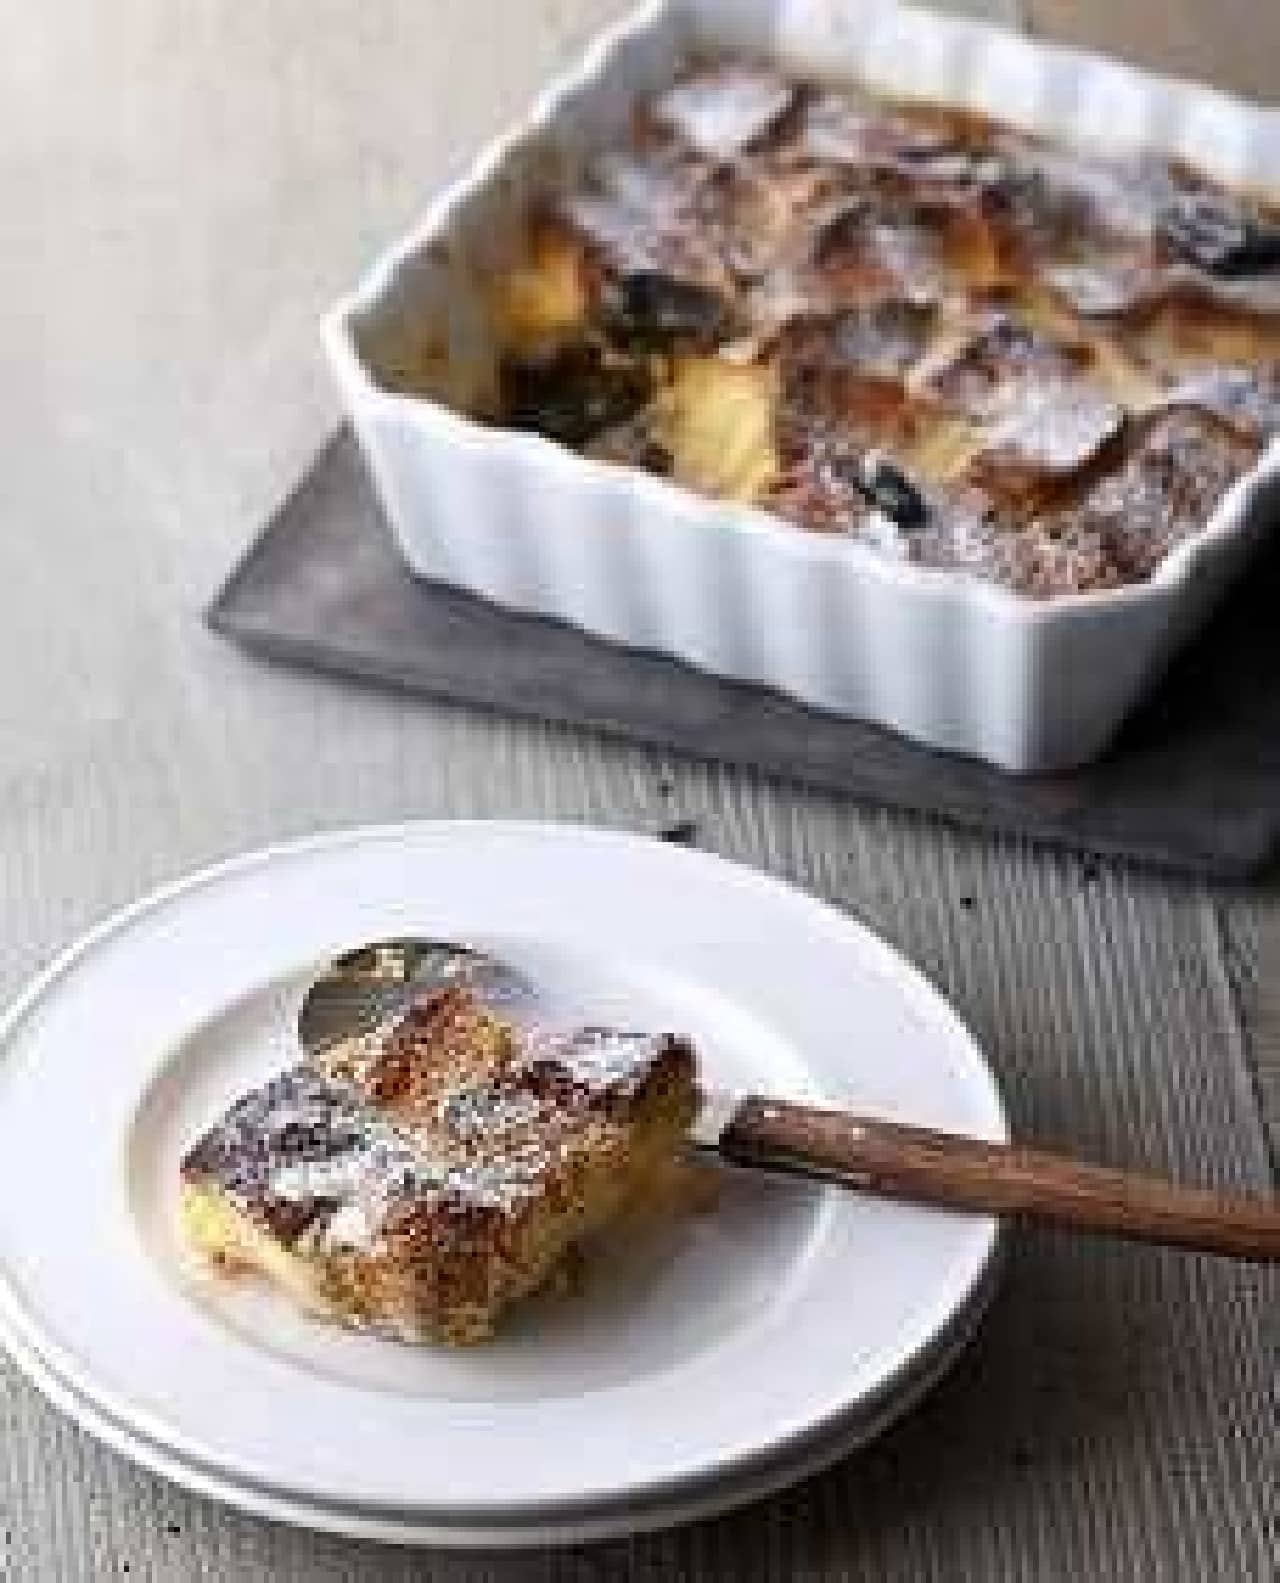 Bread pudding with prunes is recommended